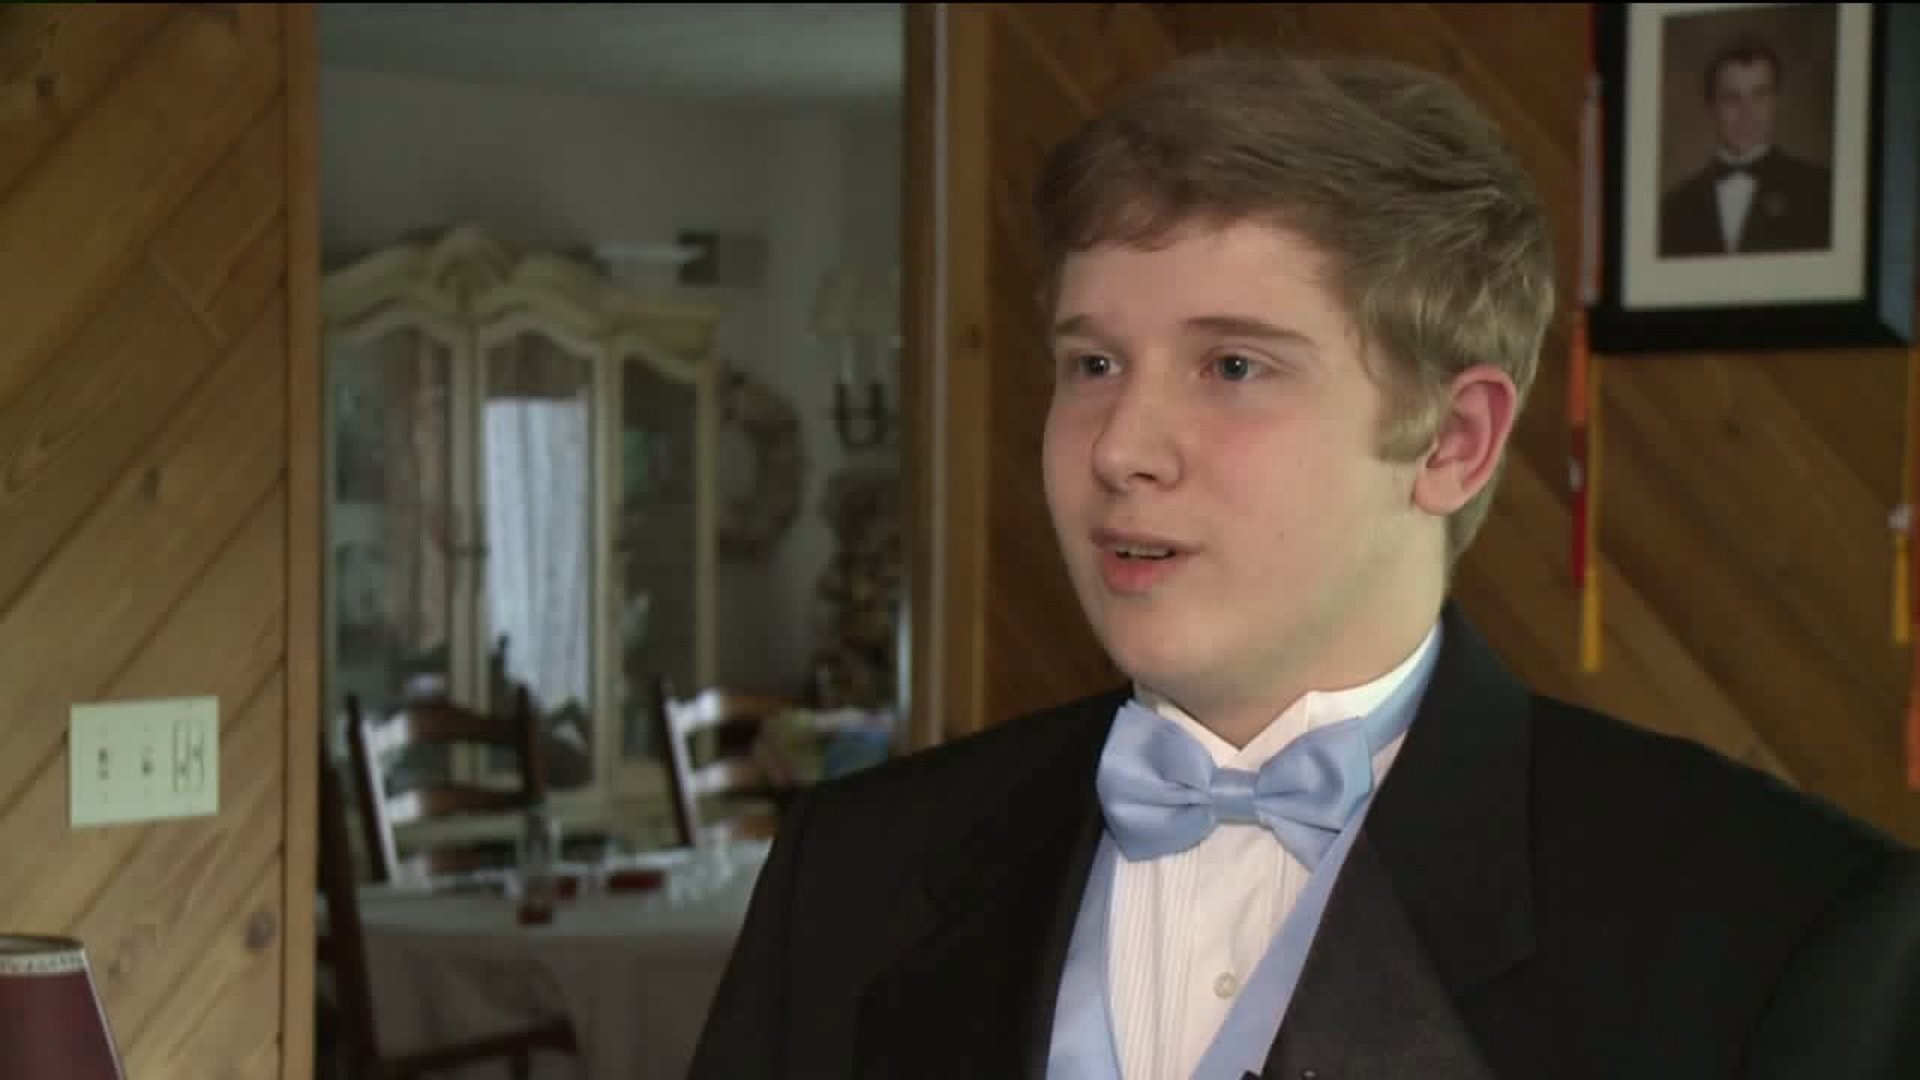 High School Senior`s Prom Date Denied Access to Dance Due to Guest Policy at Marian Catholic